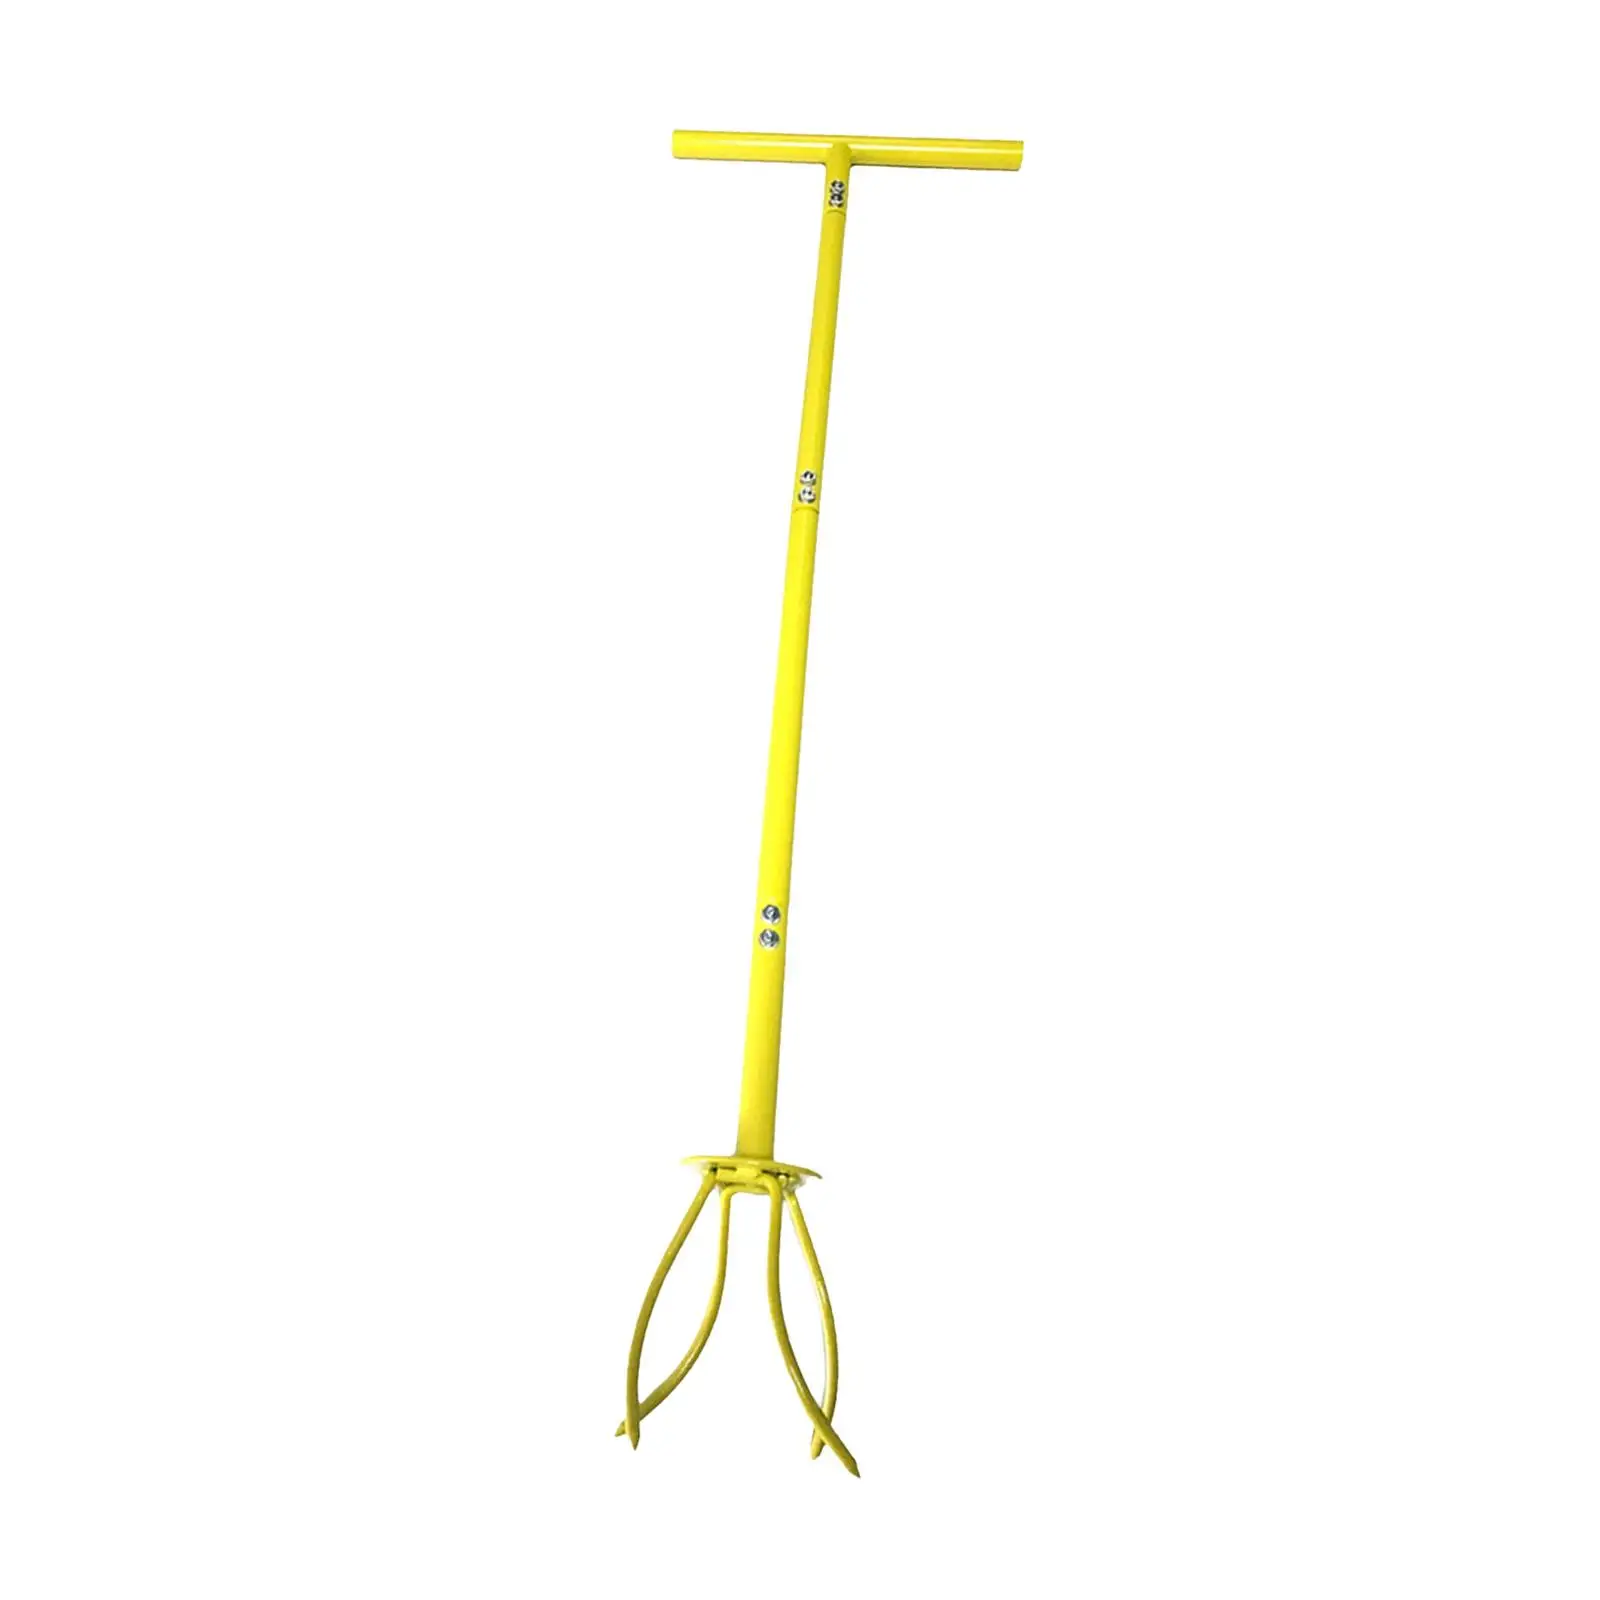 Manual Hand Tiller Detachable Durable No Bending with Adjustable Long Handle Gardening Claw Cultivator with A Removable Big Claw